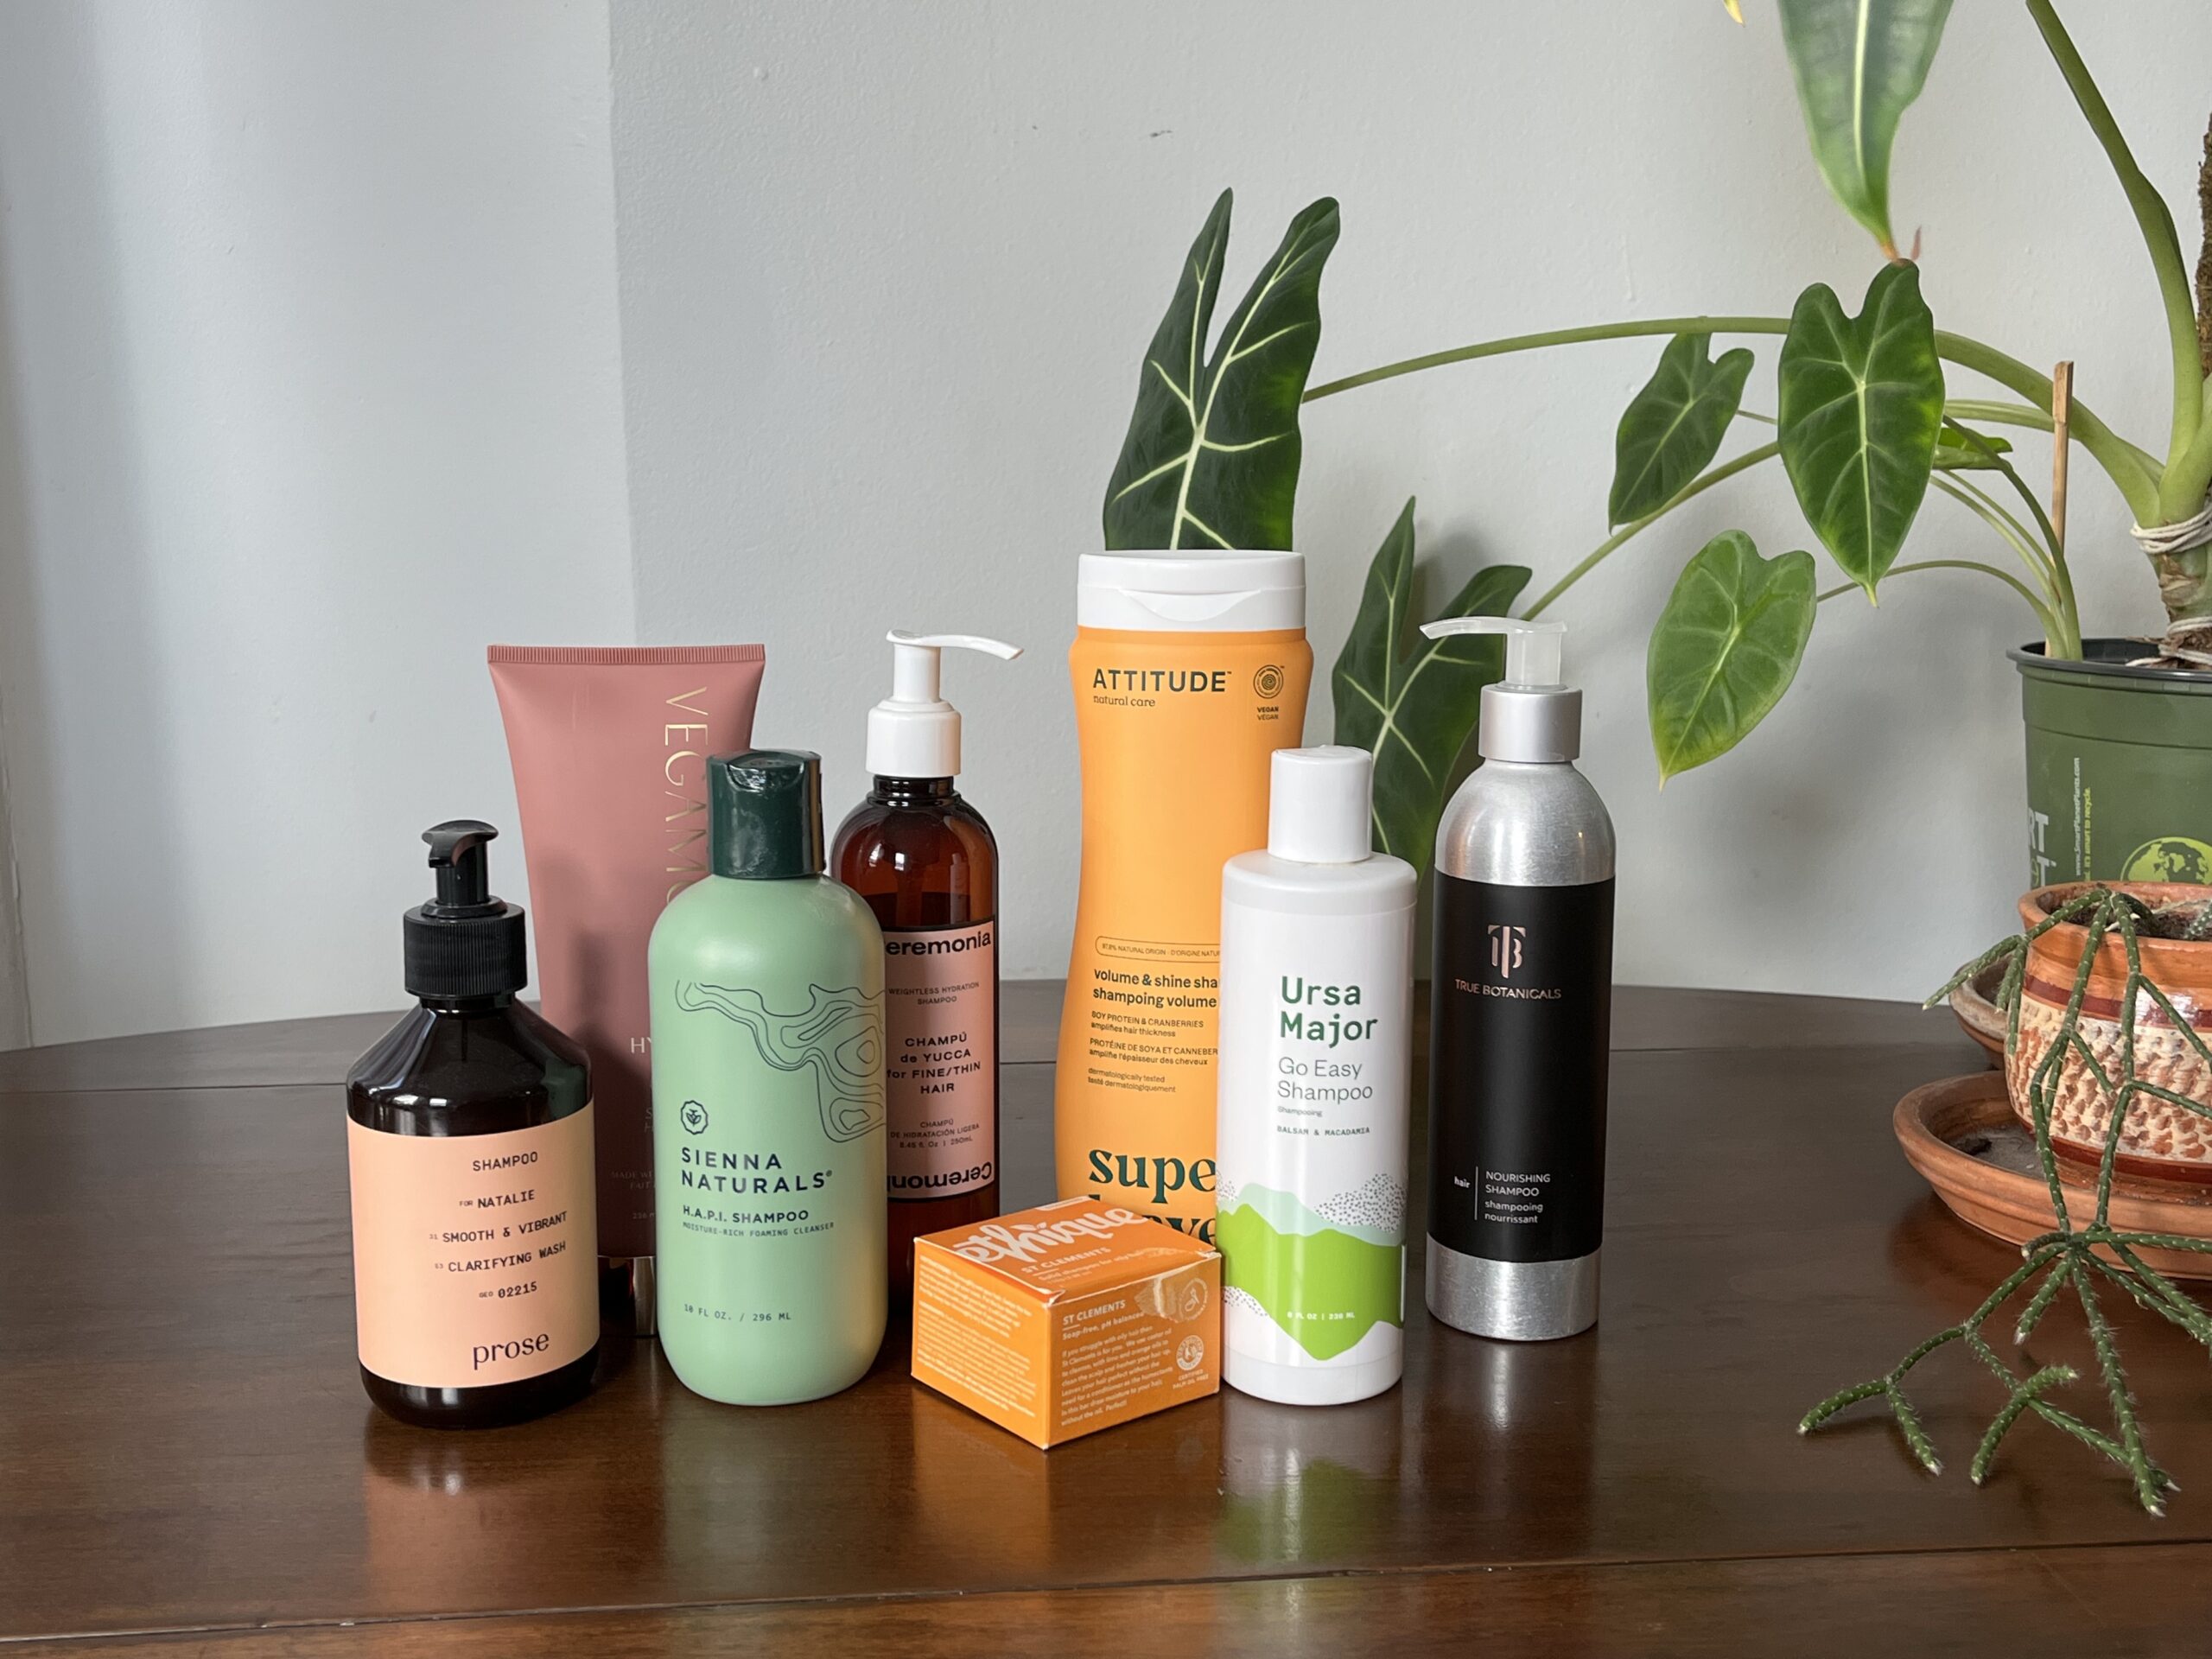 An assortment of personal care products arranged on a wooden surface against a backdrop with plants.